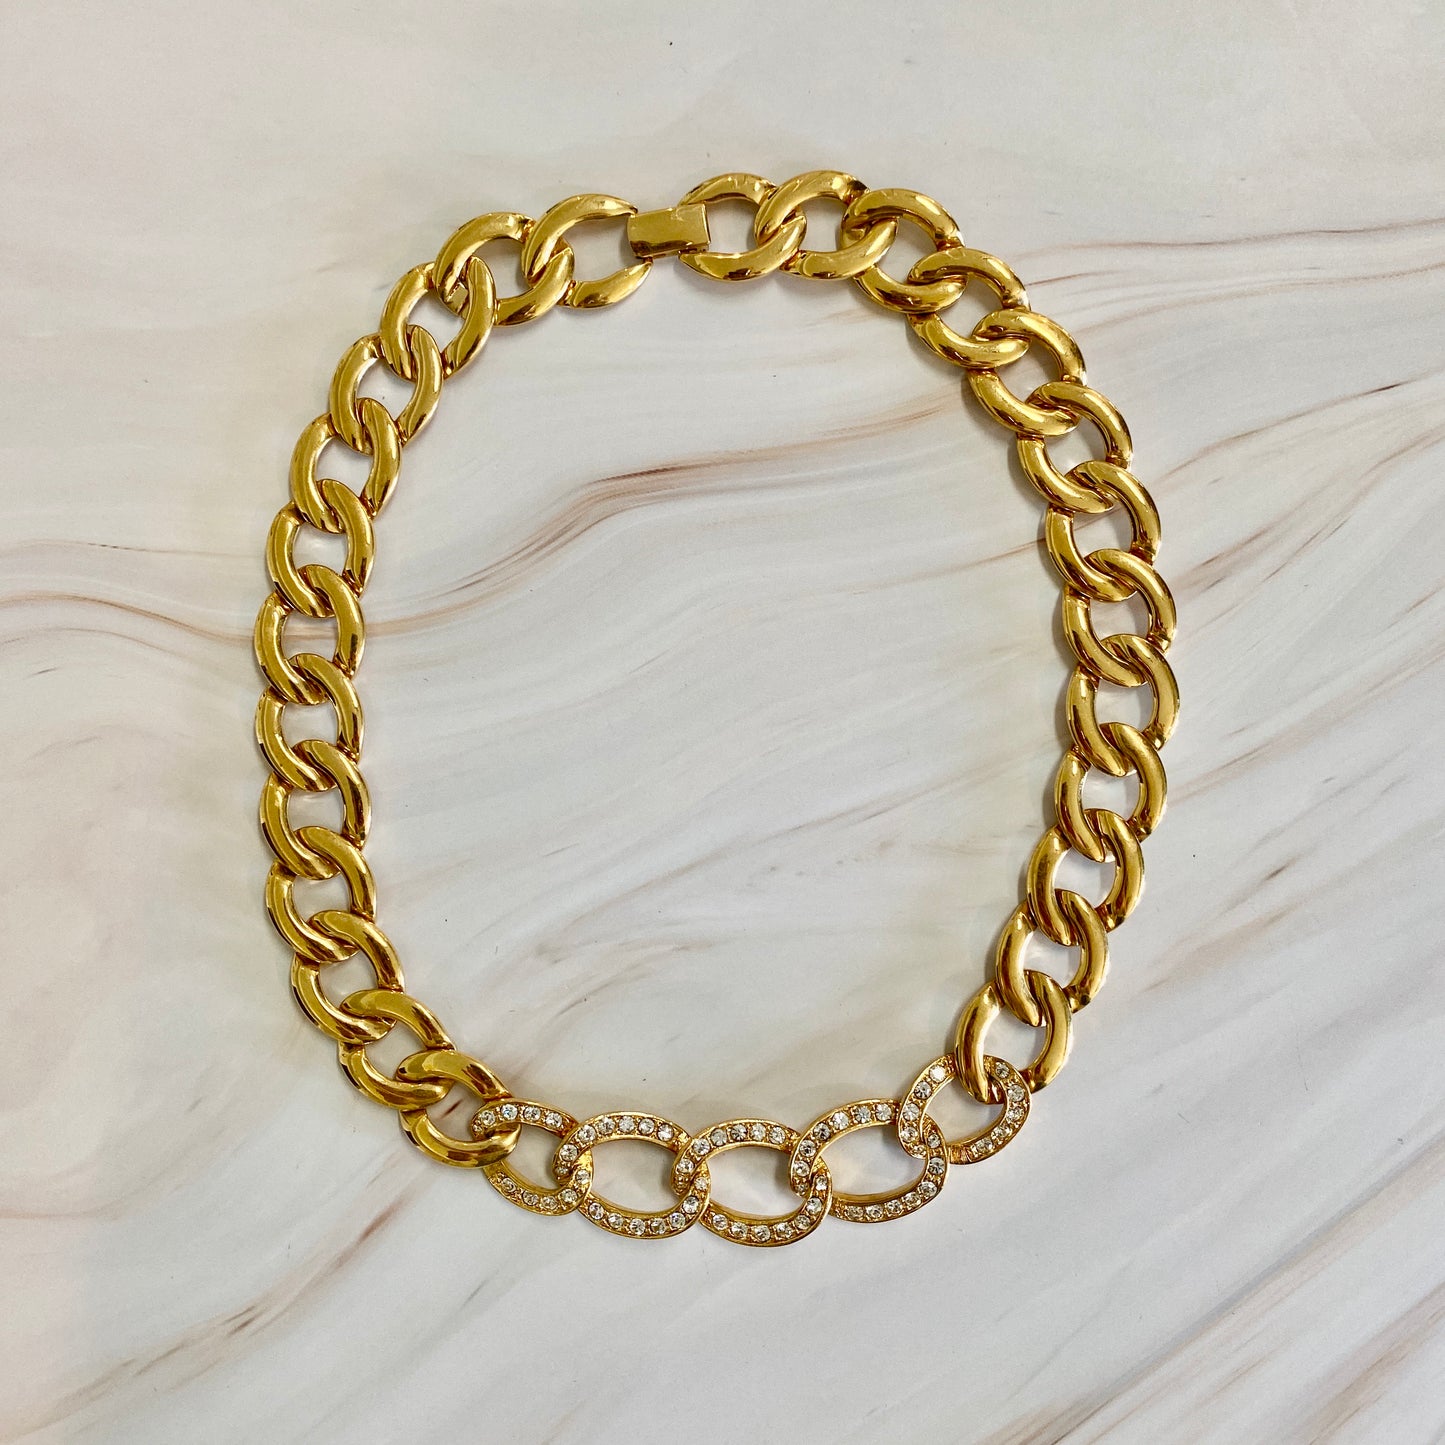 Napier Gold and Rhinestone Curb Necklace